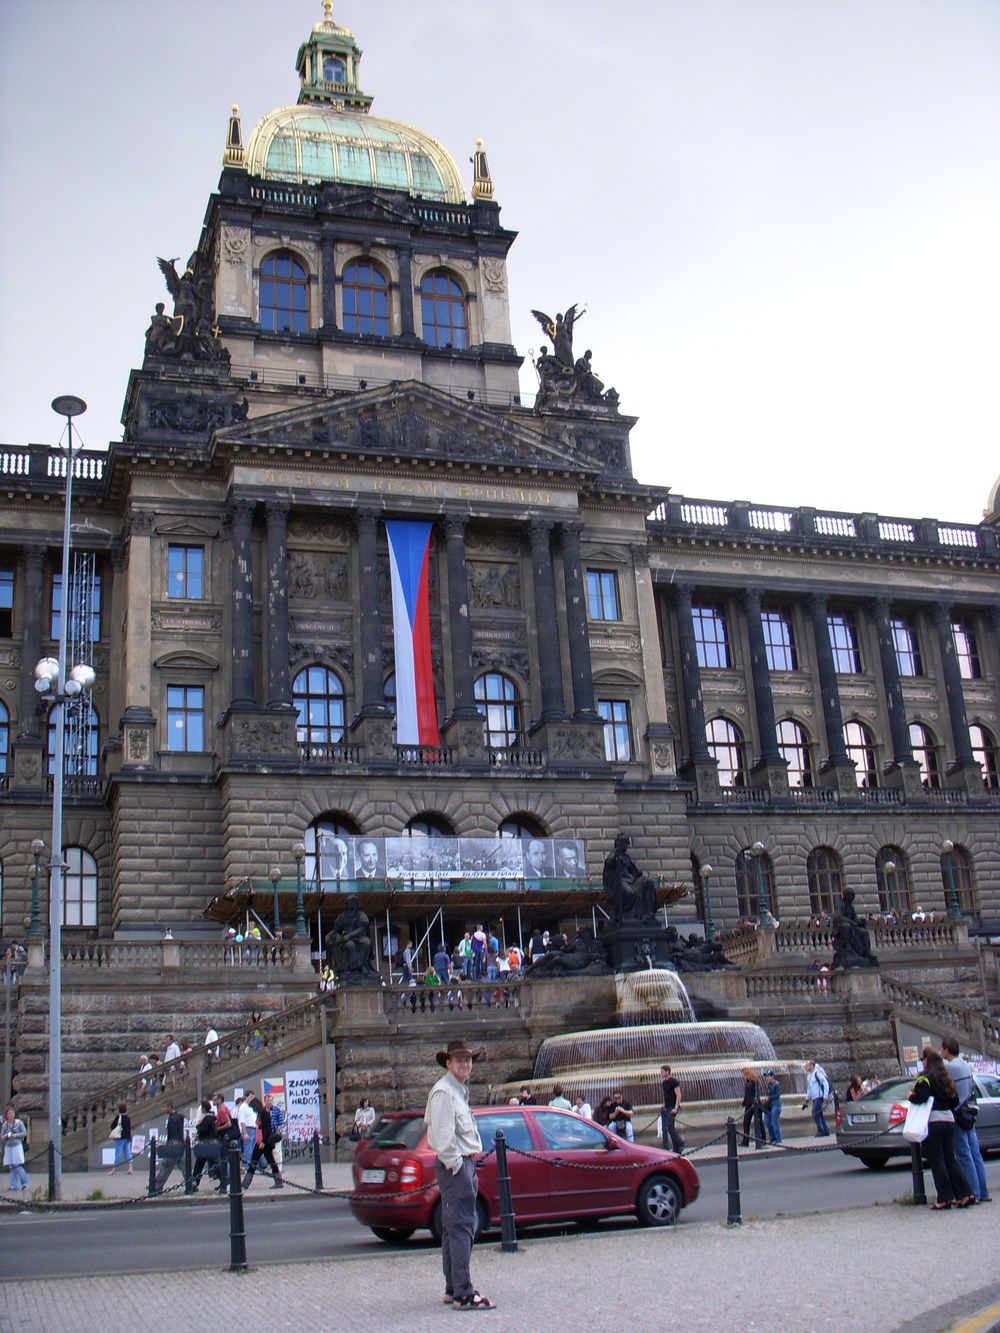   Trevor in Front of the National Museum in Prague  